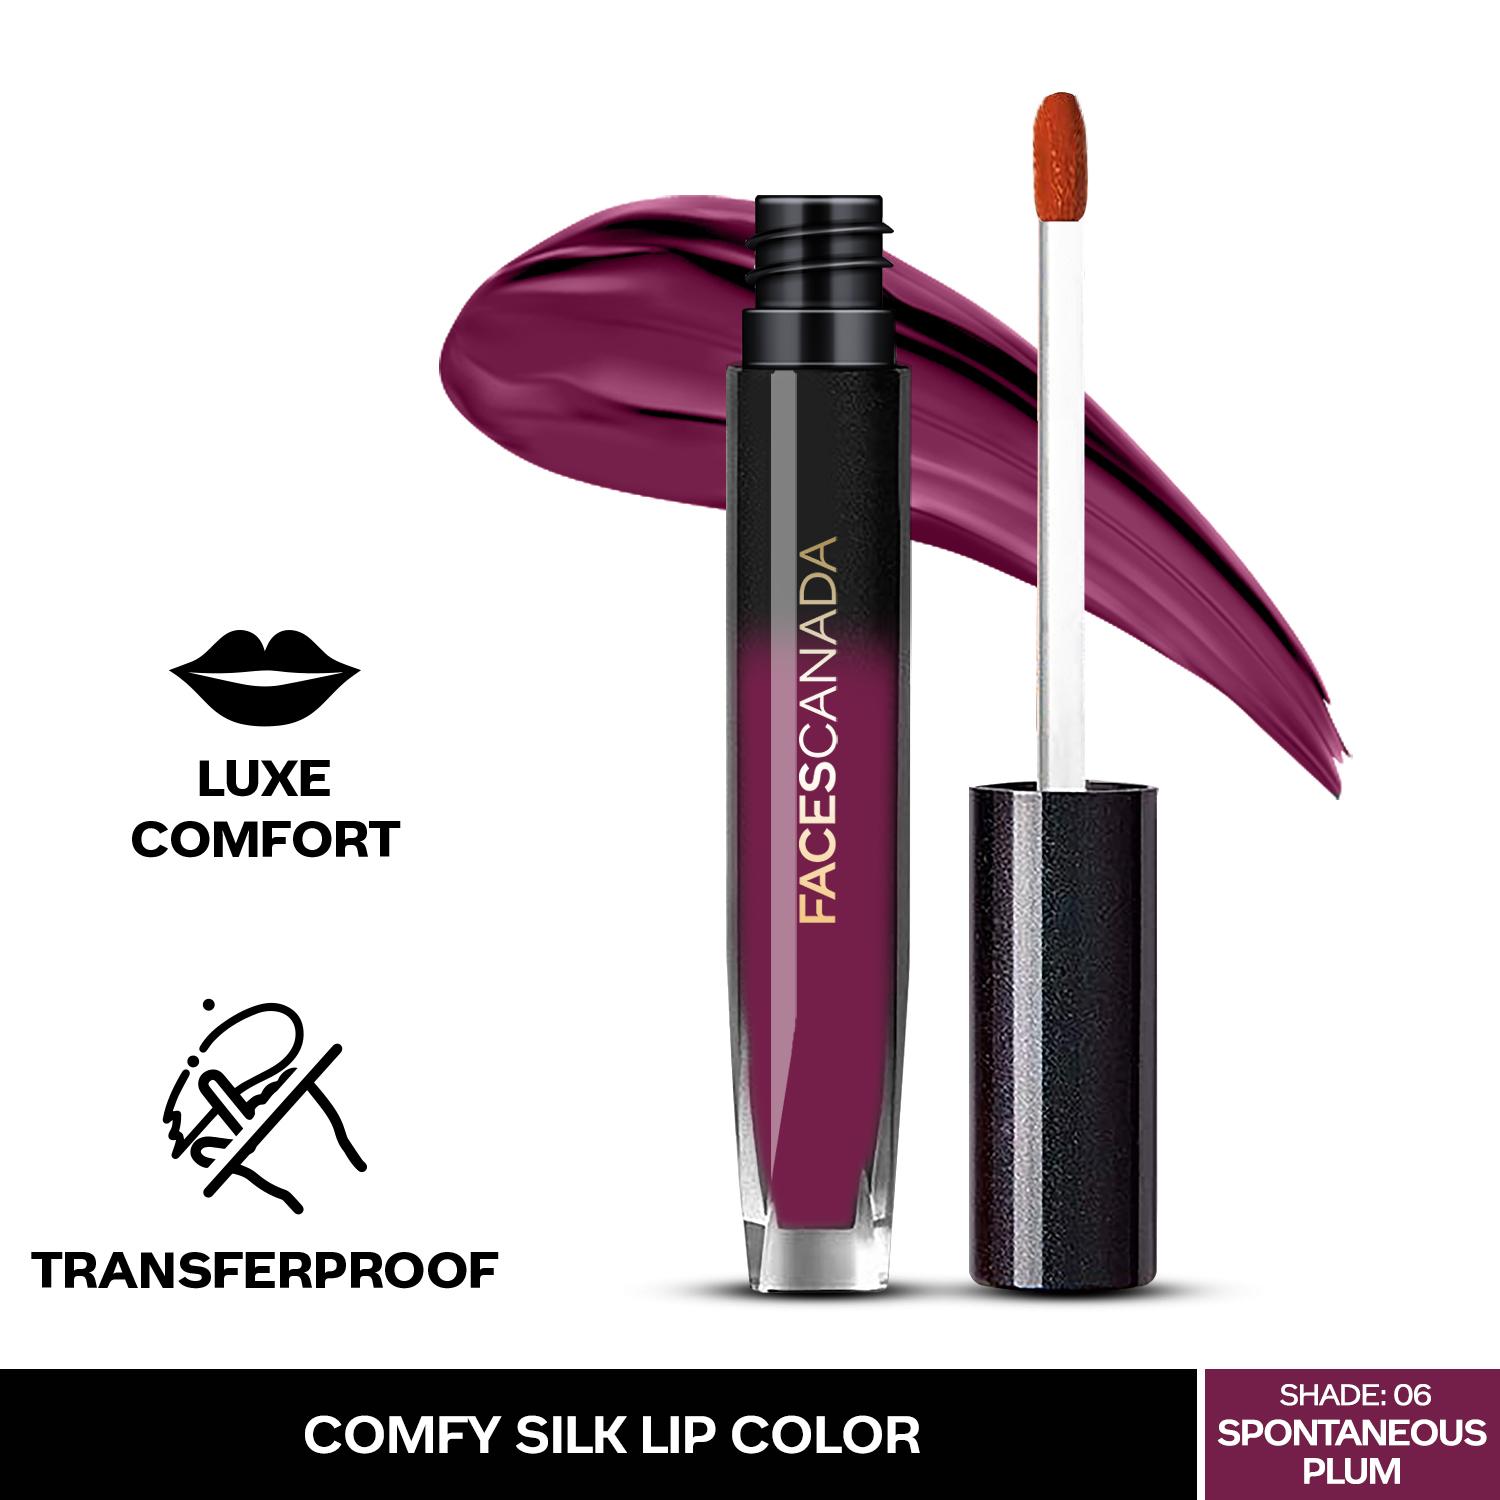 Faces Canada | Faces Canada Comfy Silk Lip Color I Mulberry Oil, Luxe Comfort, No Dryness I Spontaneous Plum 6 (3 ml)